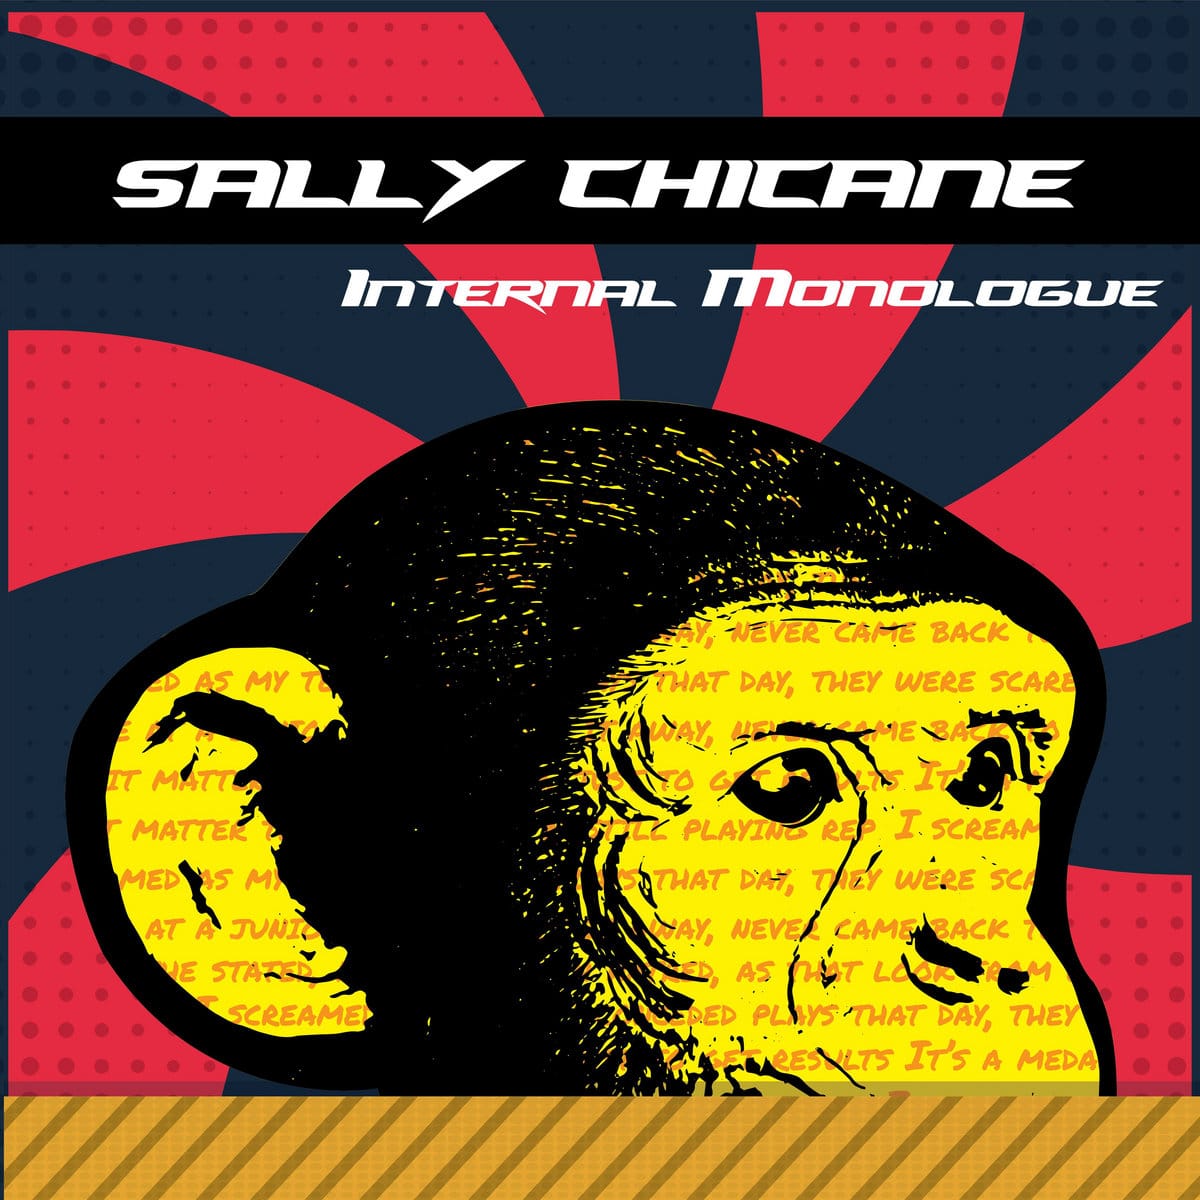 Cover art for Internal Monologue by Sally Chicane. Full record & mix: Infidel Studios